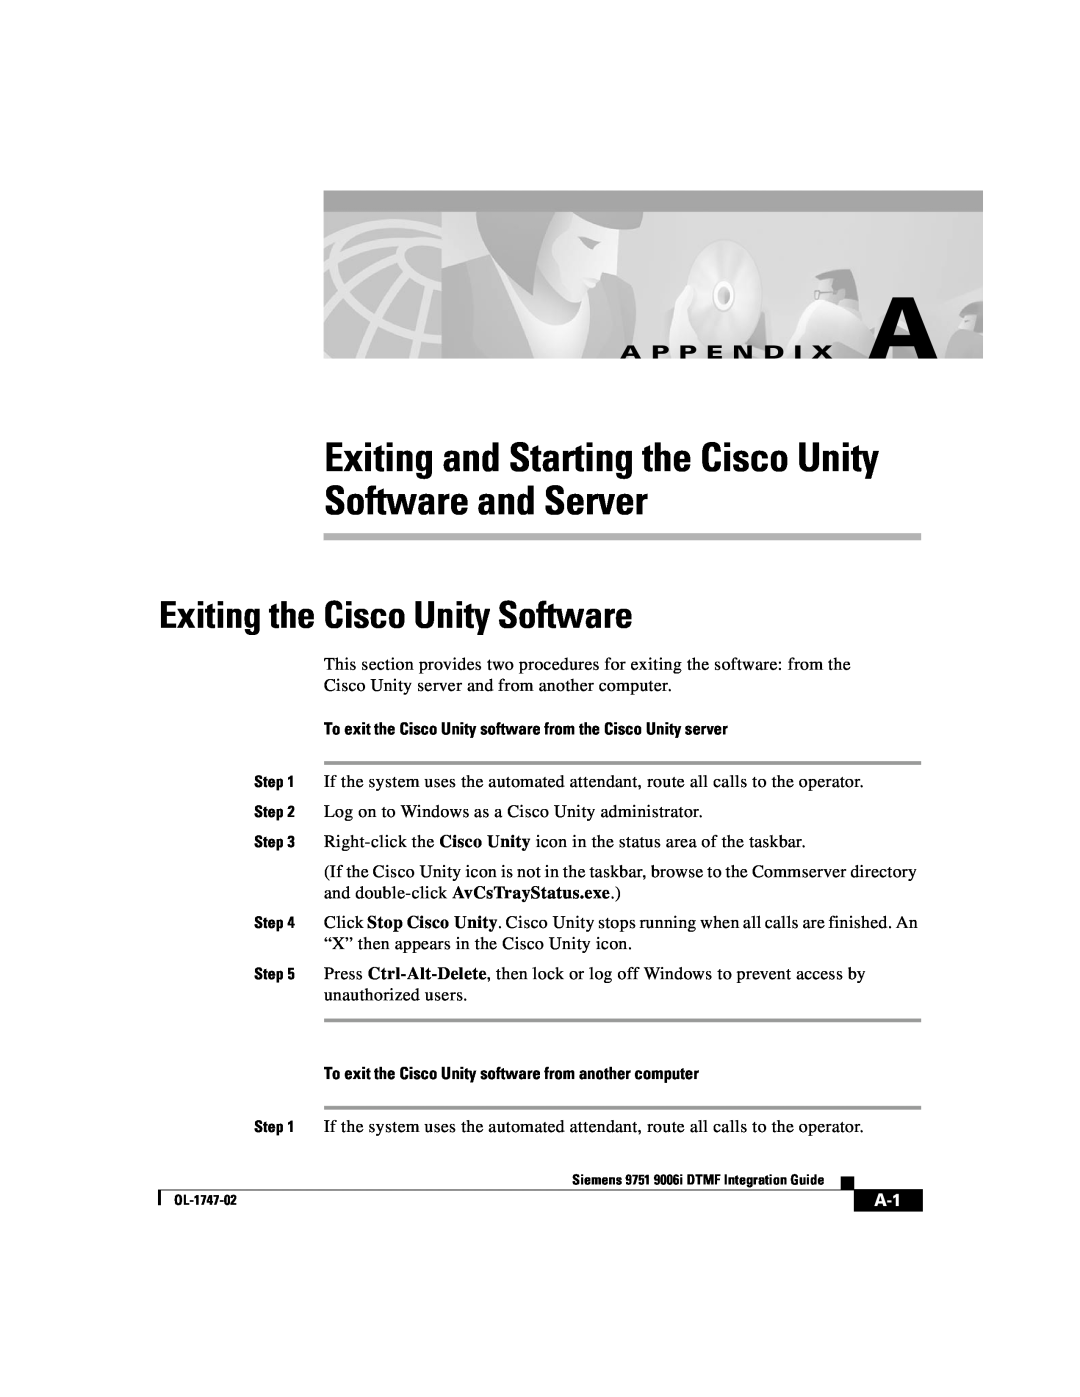 Able Planet OL-1747-02 manual Software and Server, Exiting and Starting the Cisco Unity, Exiting the Cisco Unity Software 